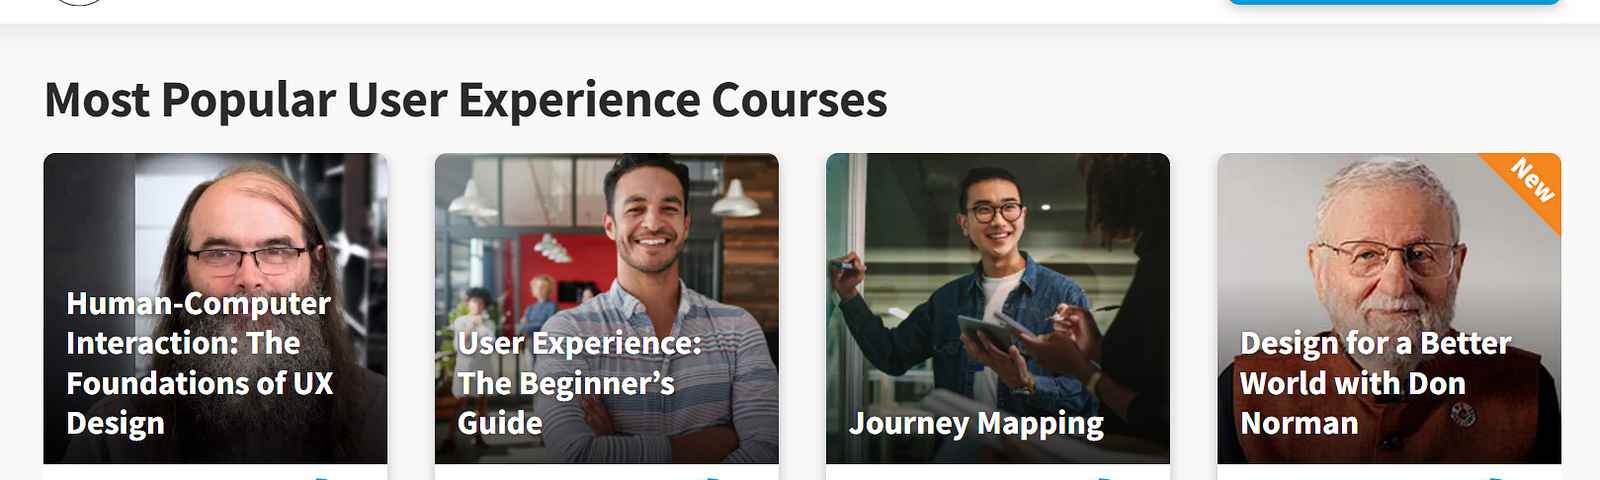 The most popular User Experience Courses from Interaction Design Foundation.